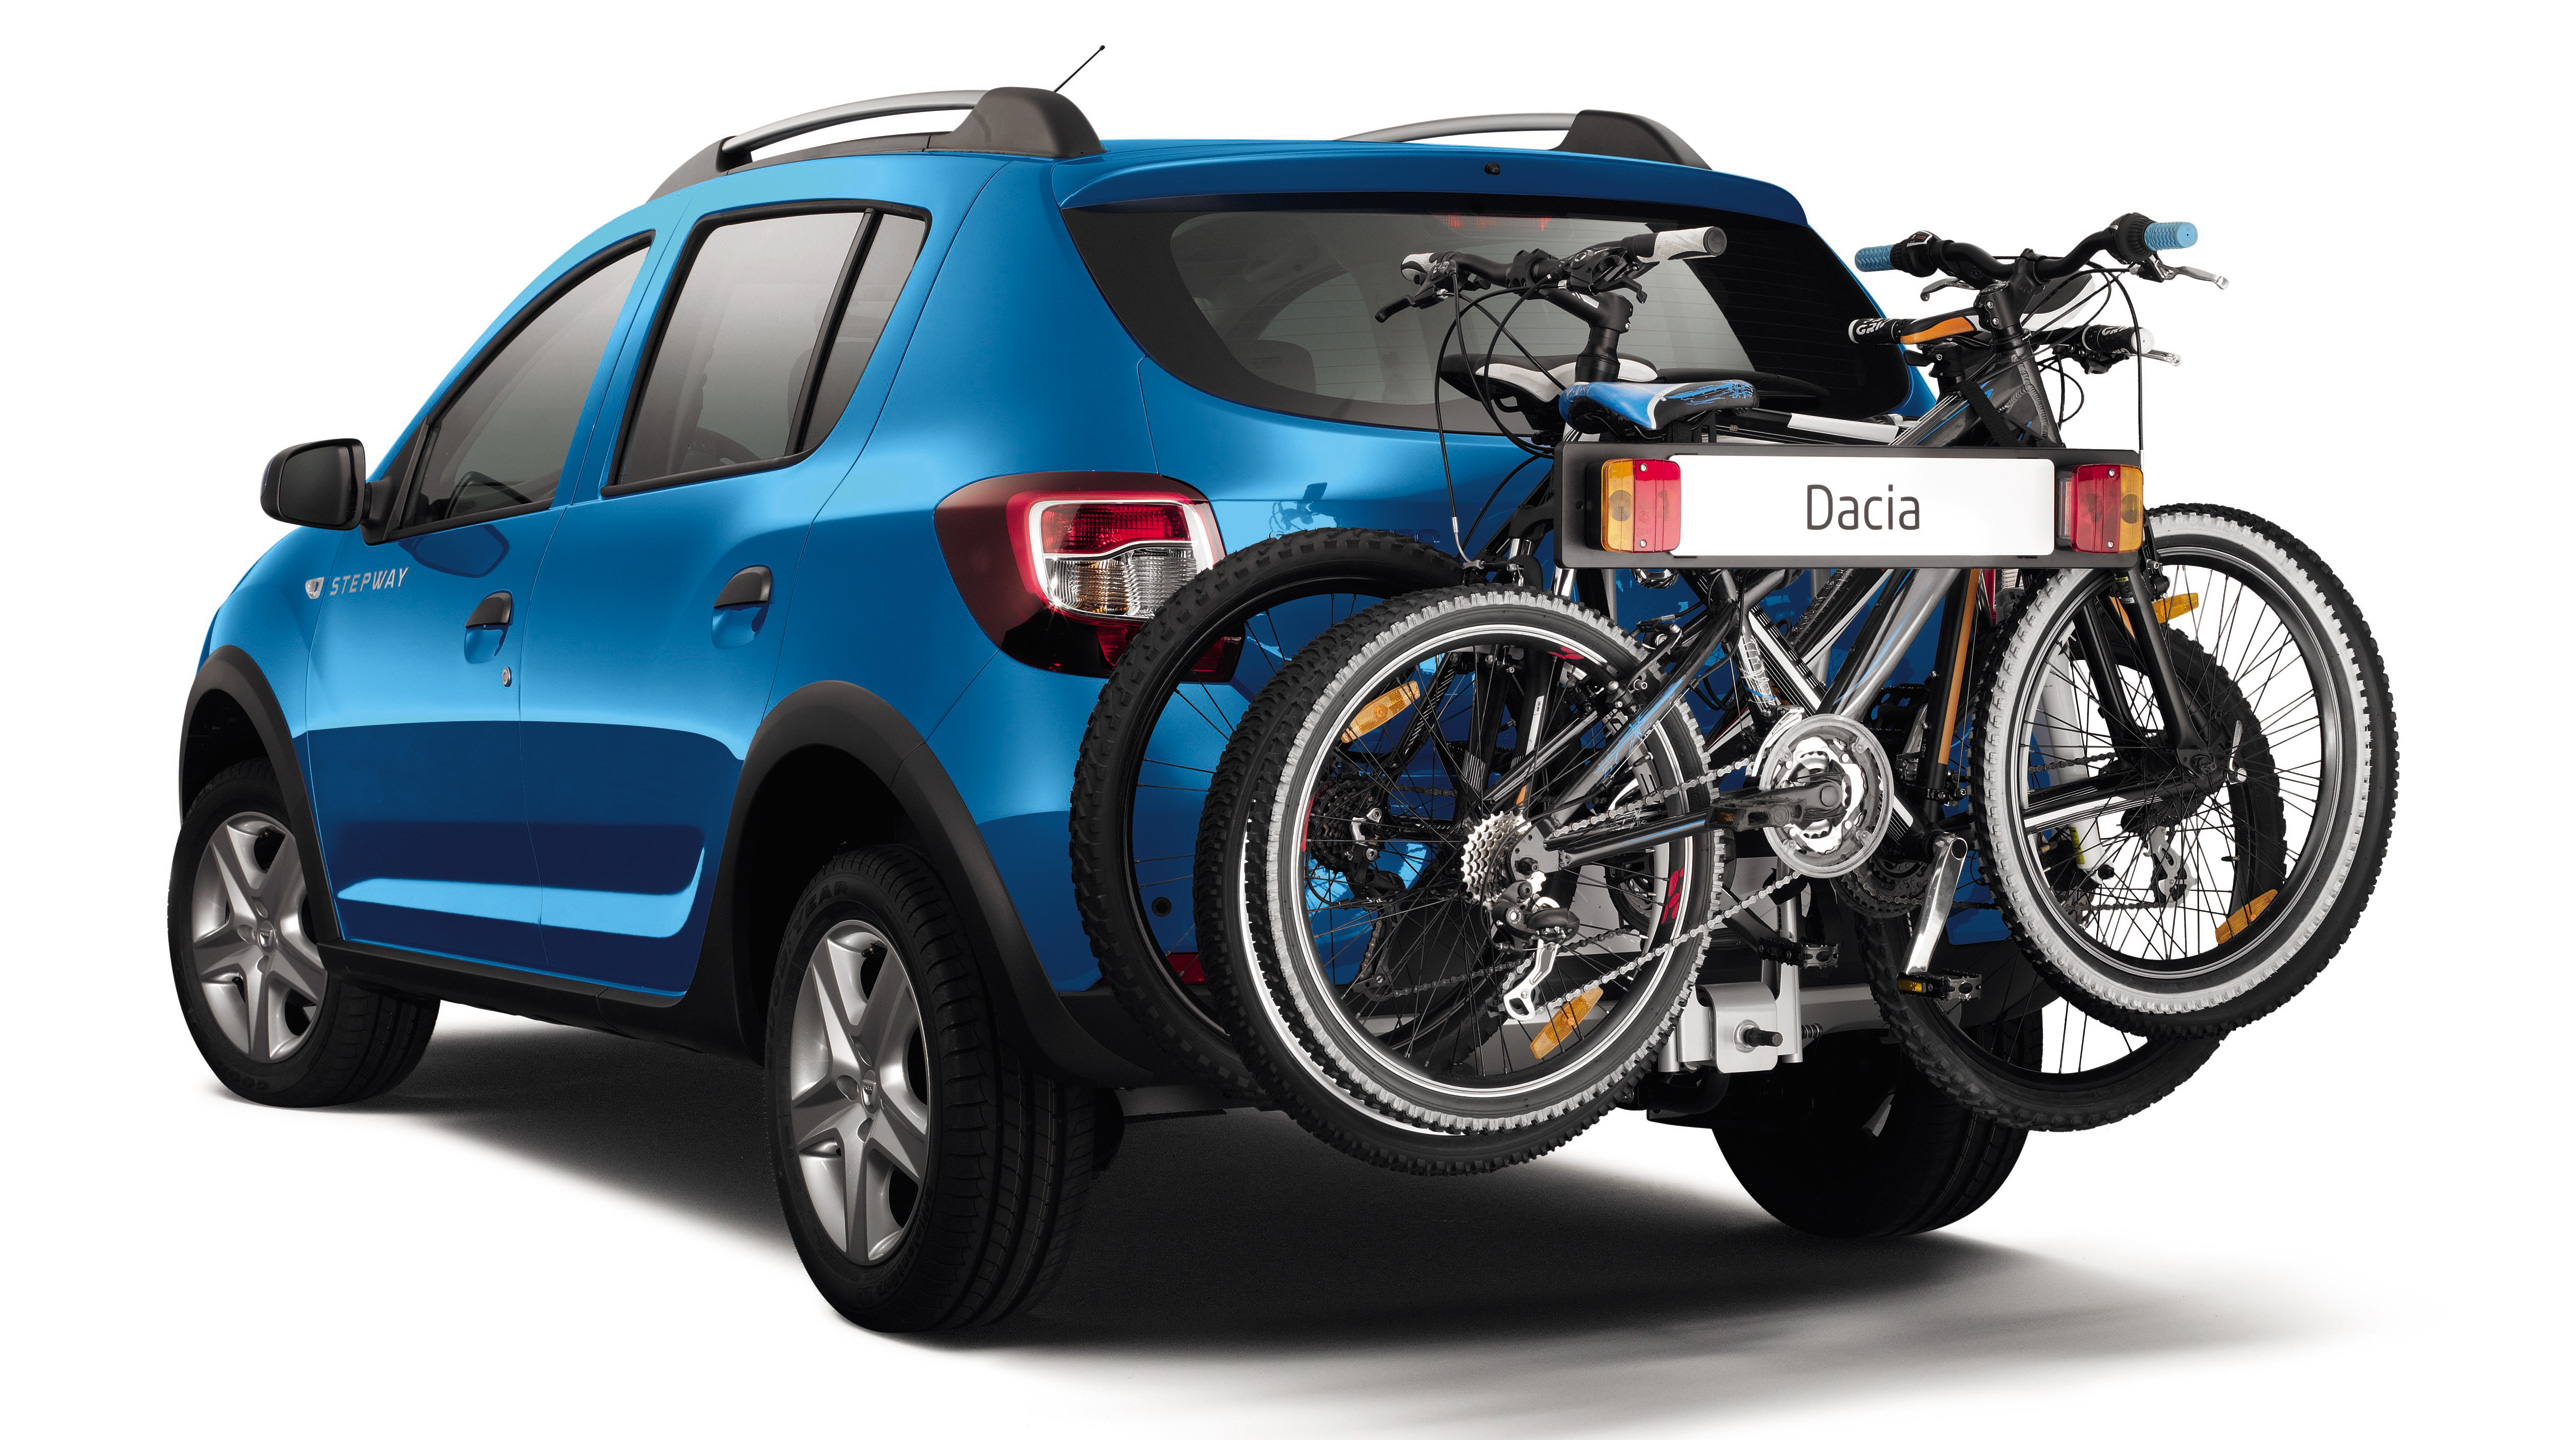 VDP Travel Rear Carrier Compatible with Dacia Sandero Stepway from 13